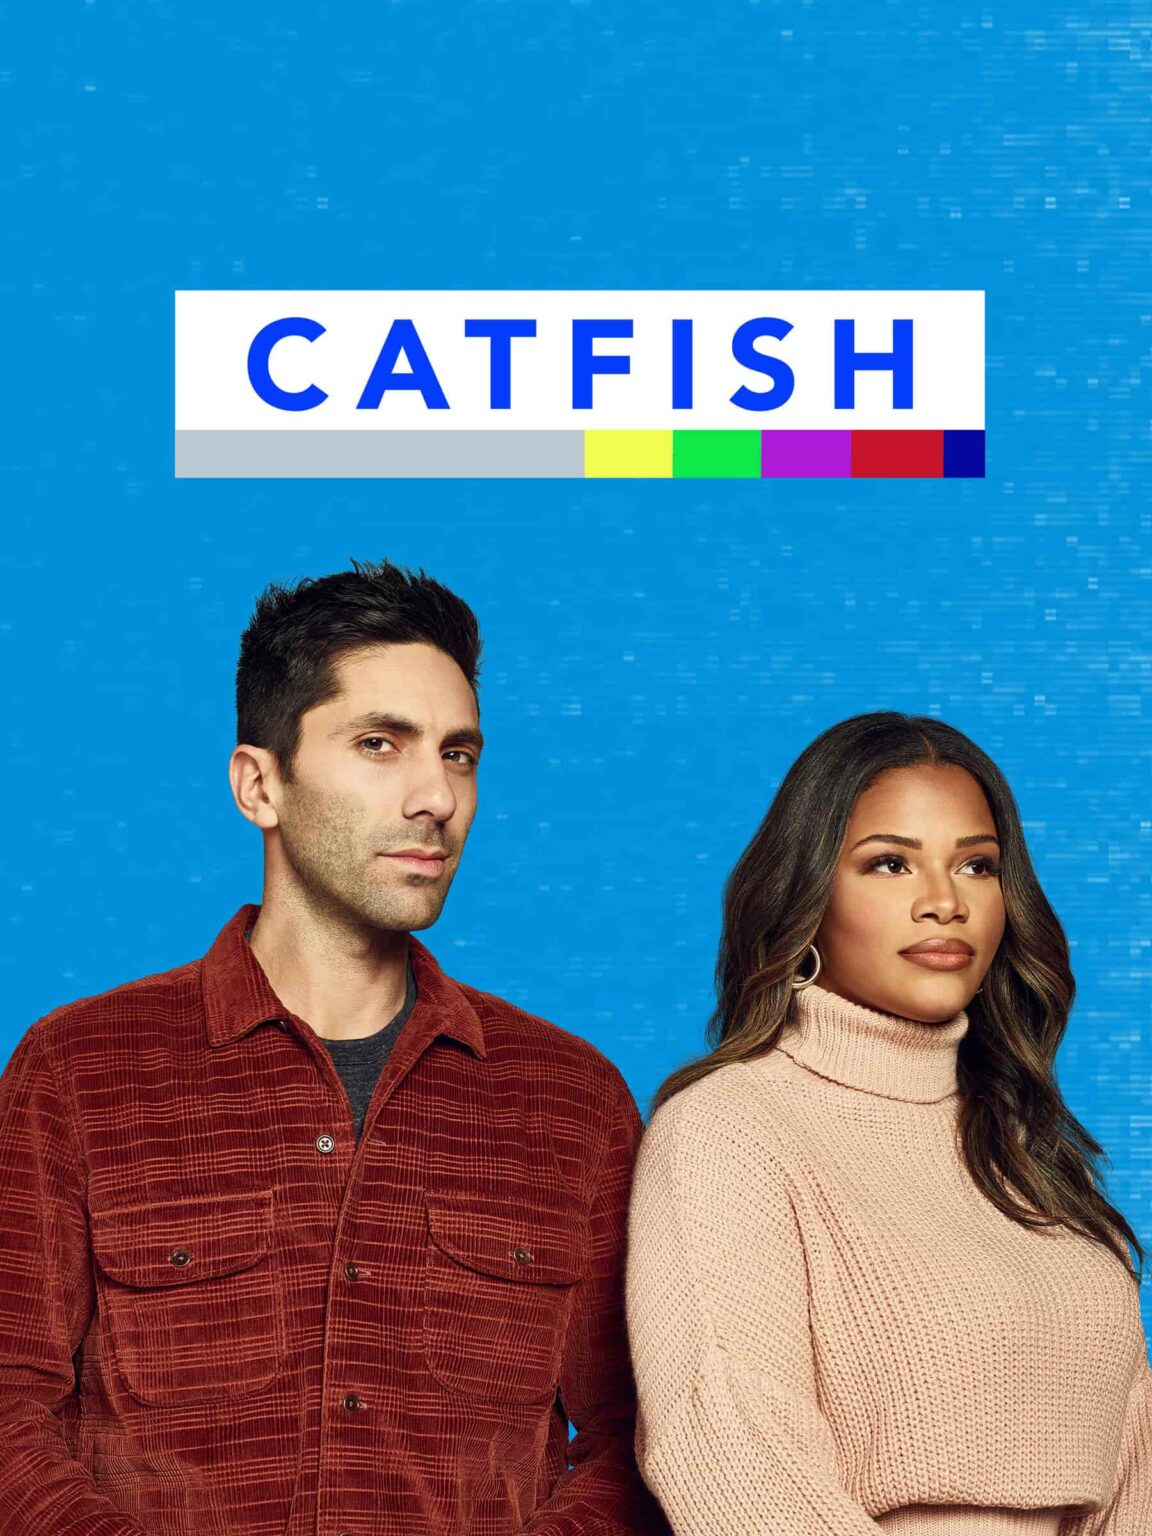 Remember all the wild times on the 'Catfish' TV show? If you need a refresher, laugh along with us here as we take you back to all the funniest moments.